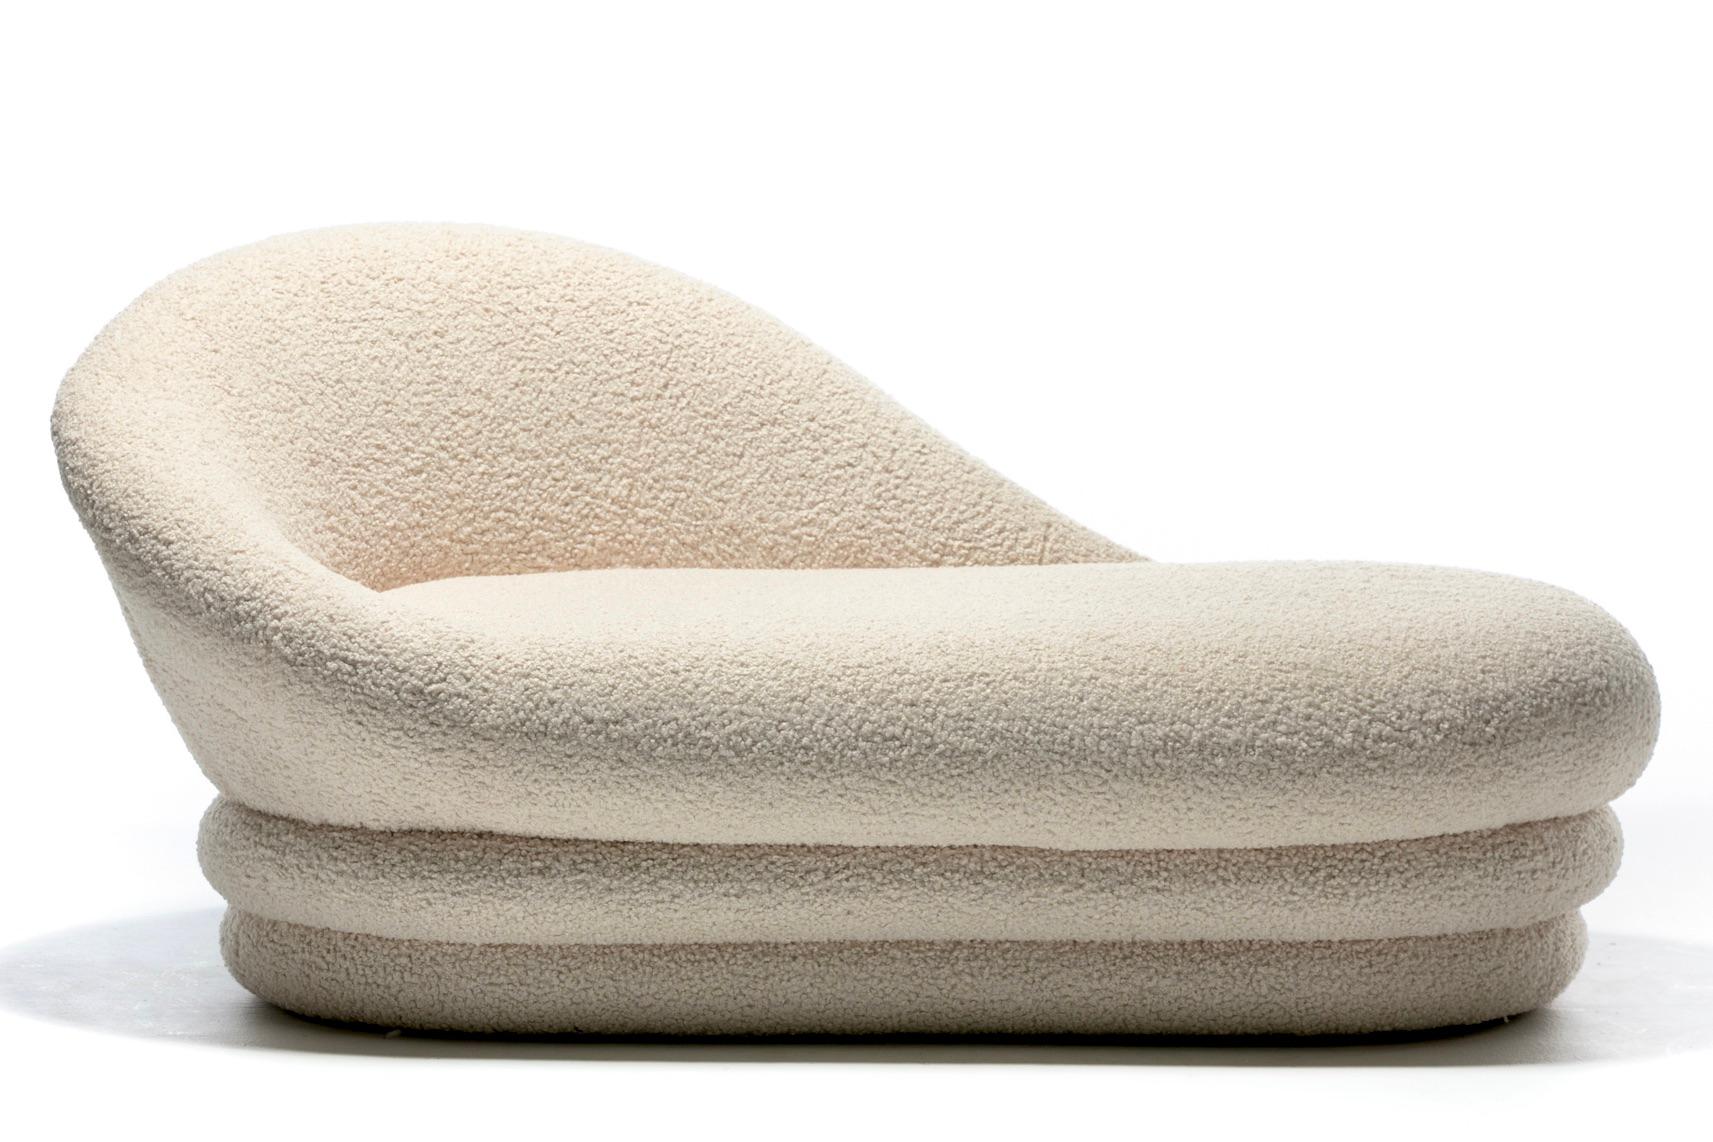 Float away from the worries of the day in this luxurious post modern chaise lounge newly professionally upholstered in super soft ivory white bouclé. Sculptural form exudes a sophisticated look that's gentle and inviting. Ivory white bouclé fabric's